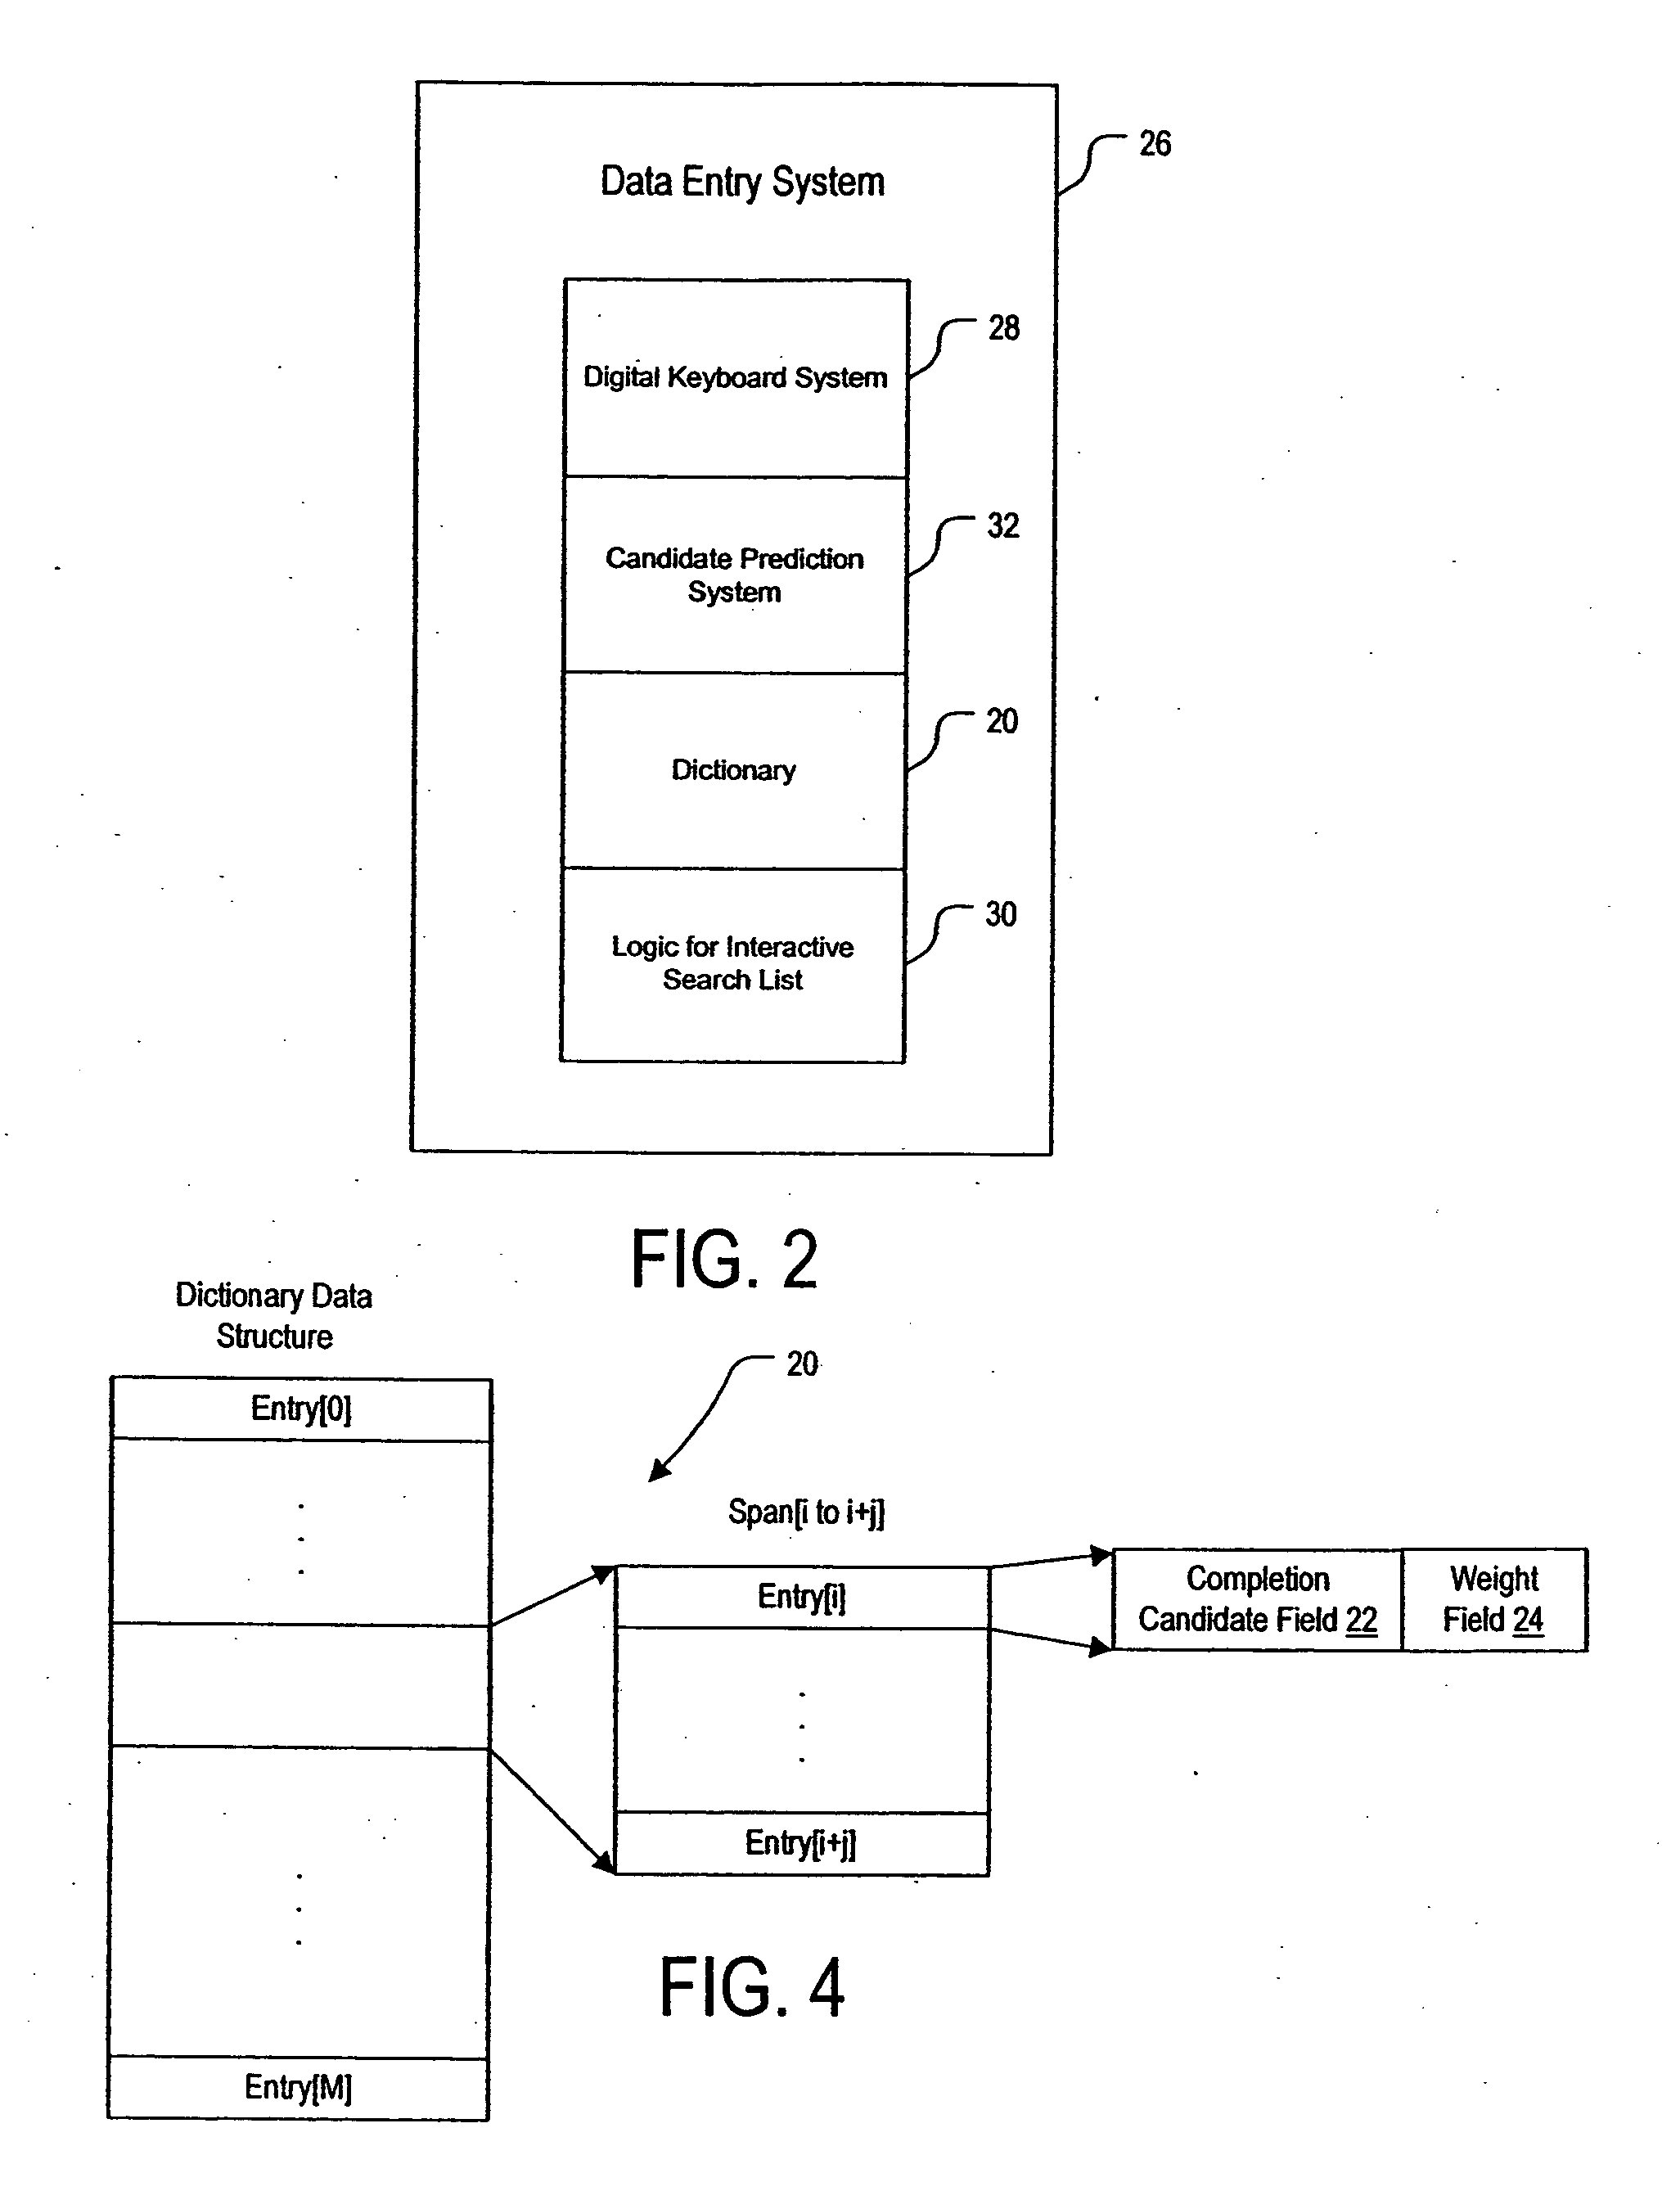 Data entry for personal computing devices